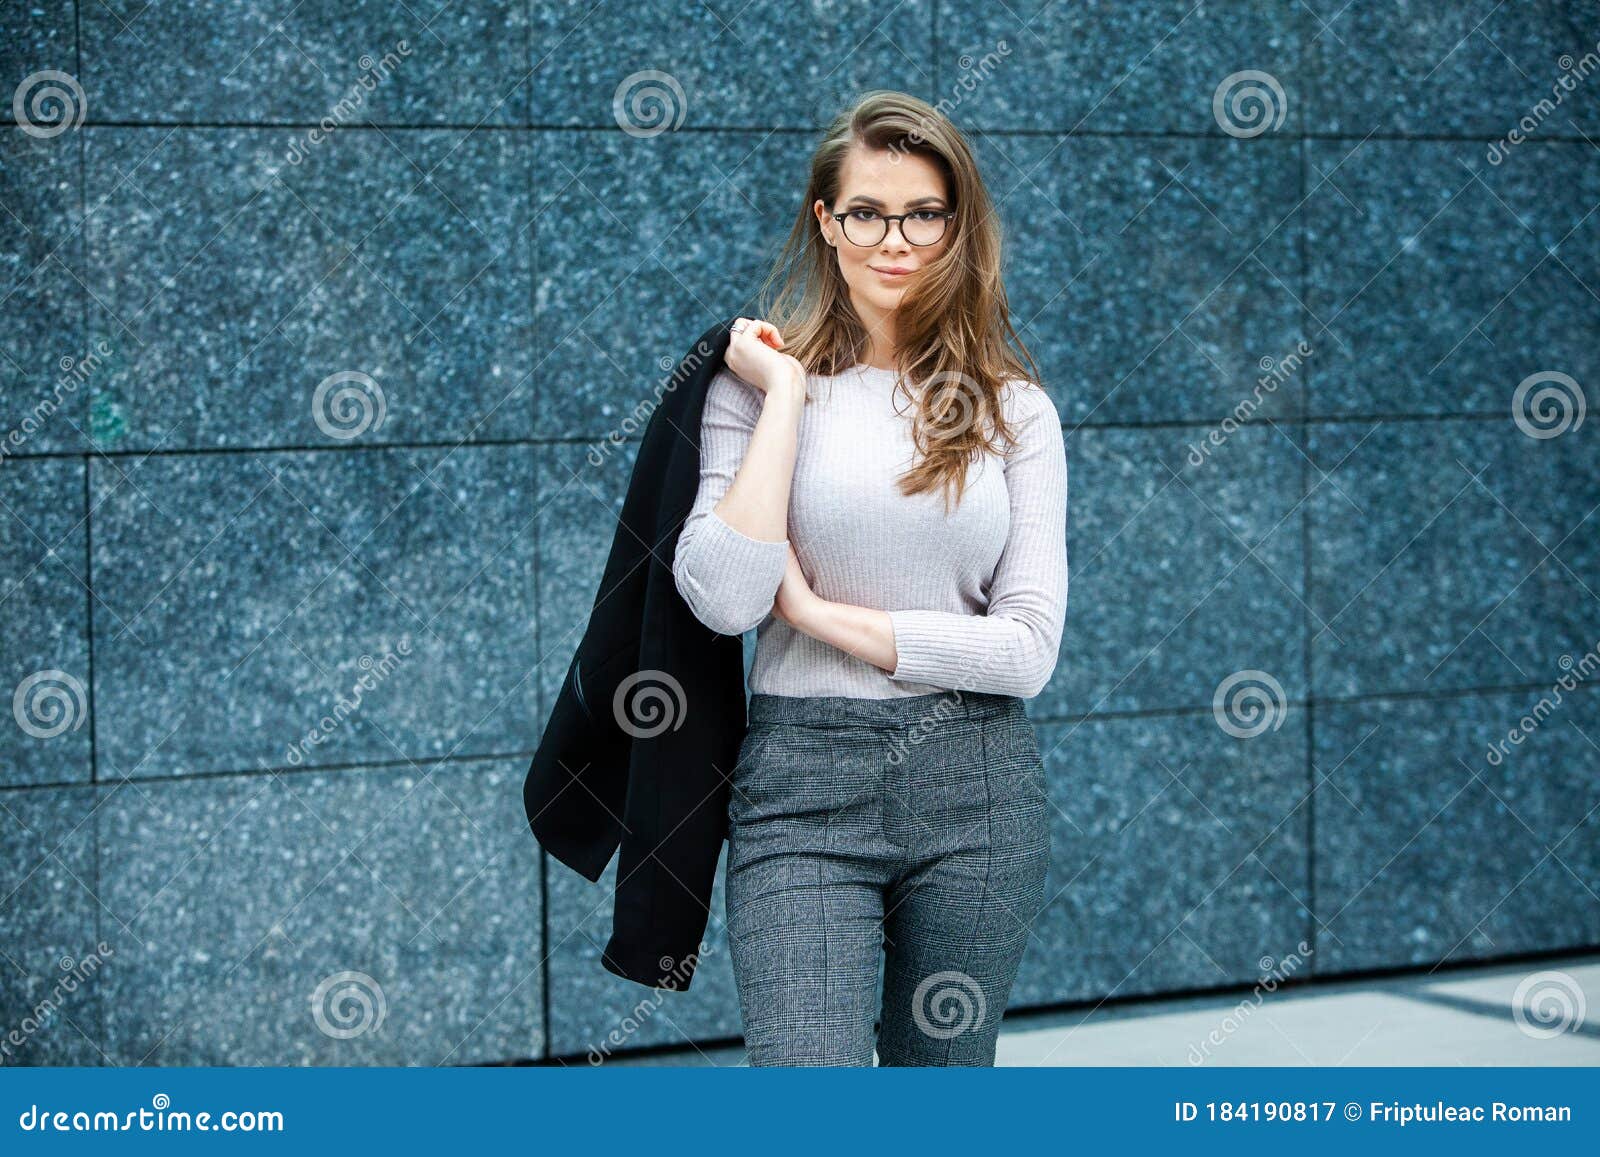 Russian Business Lady Female Business Leader Concept Stock Image Image Of Computer Idea